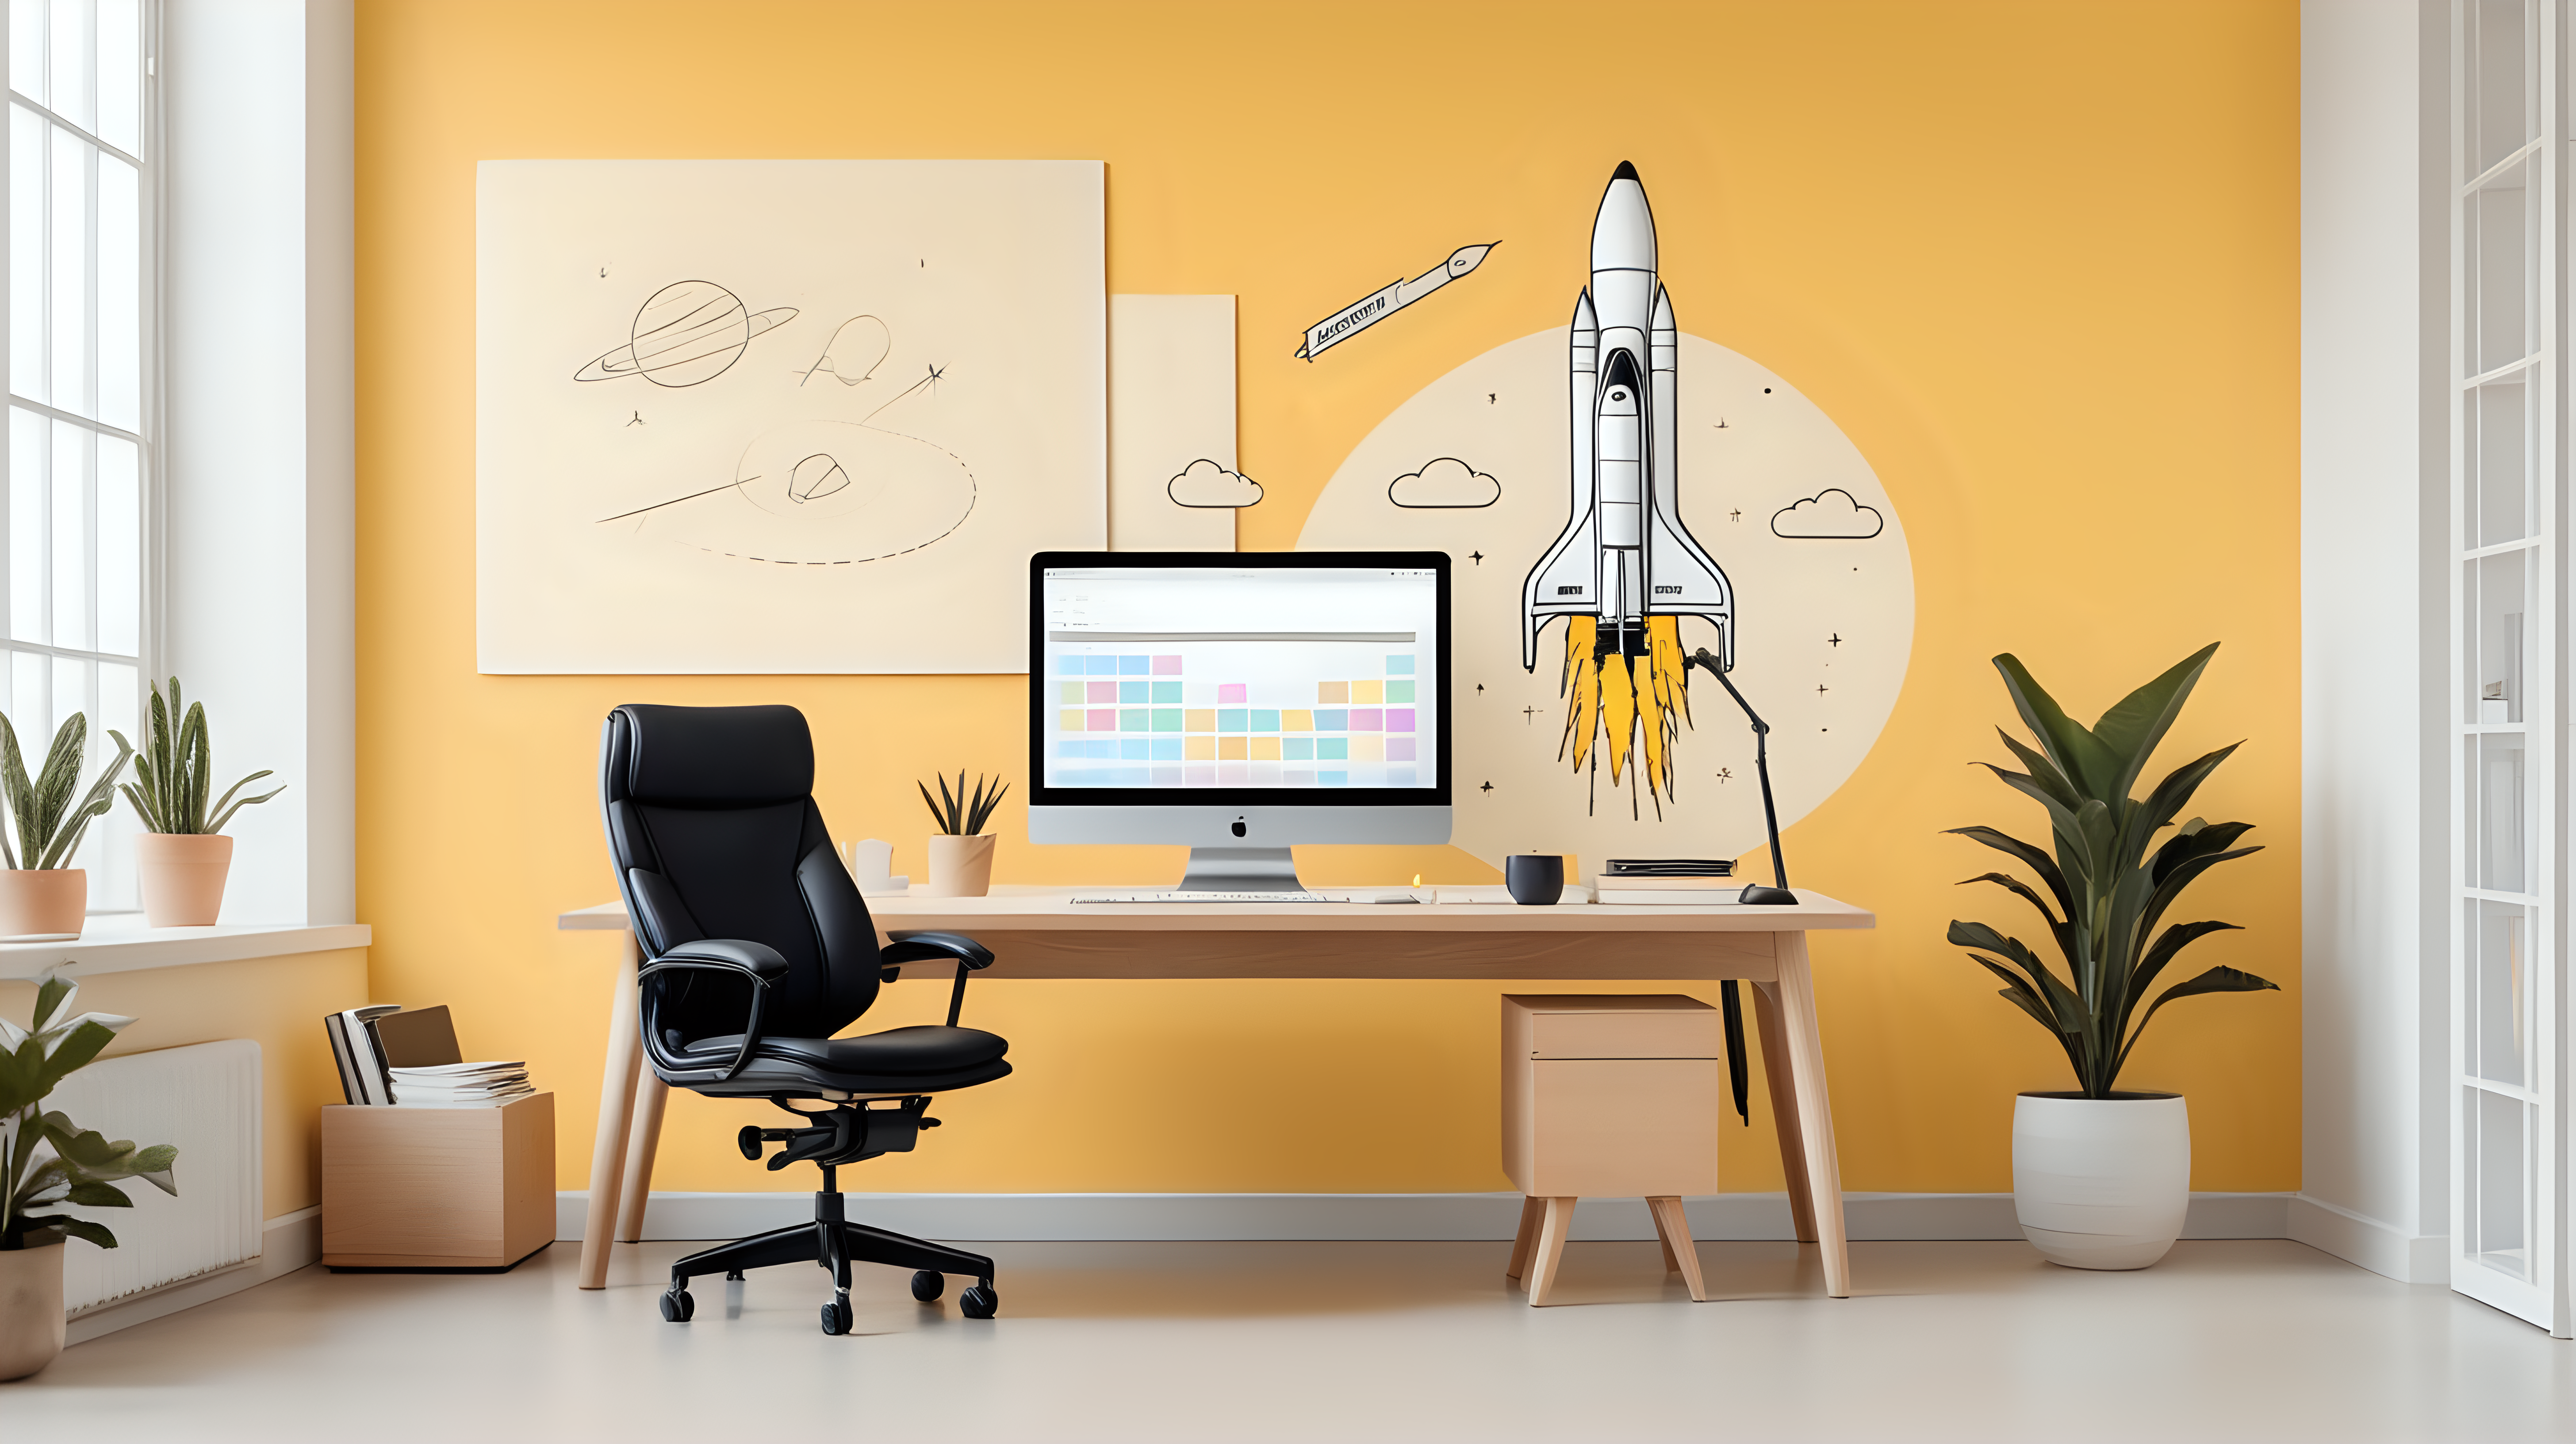 Minimalistic office with some furniture background for Tech product management online course. With Steve Jobs and rocket launch poster on the wall. Pastel yellow painted walls

